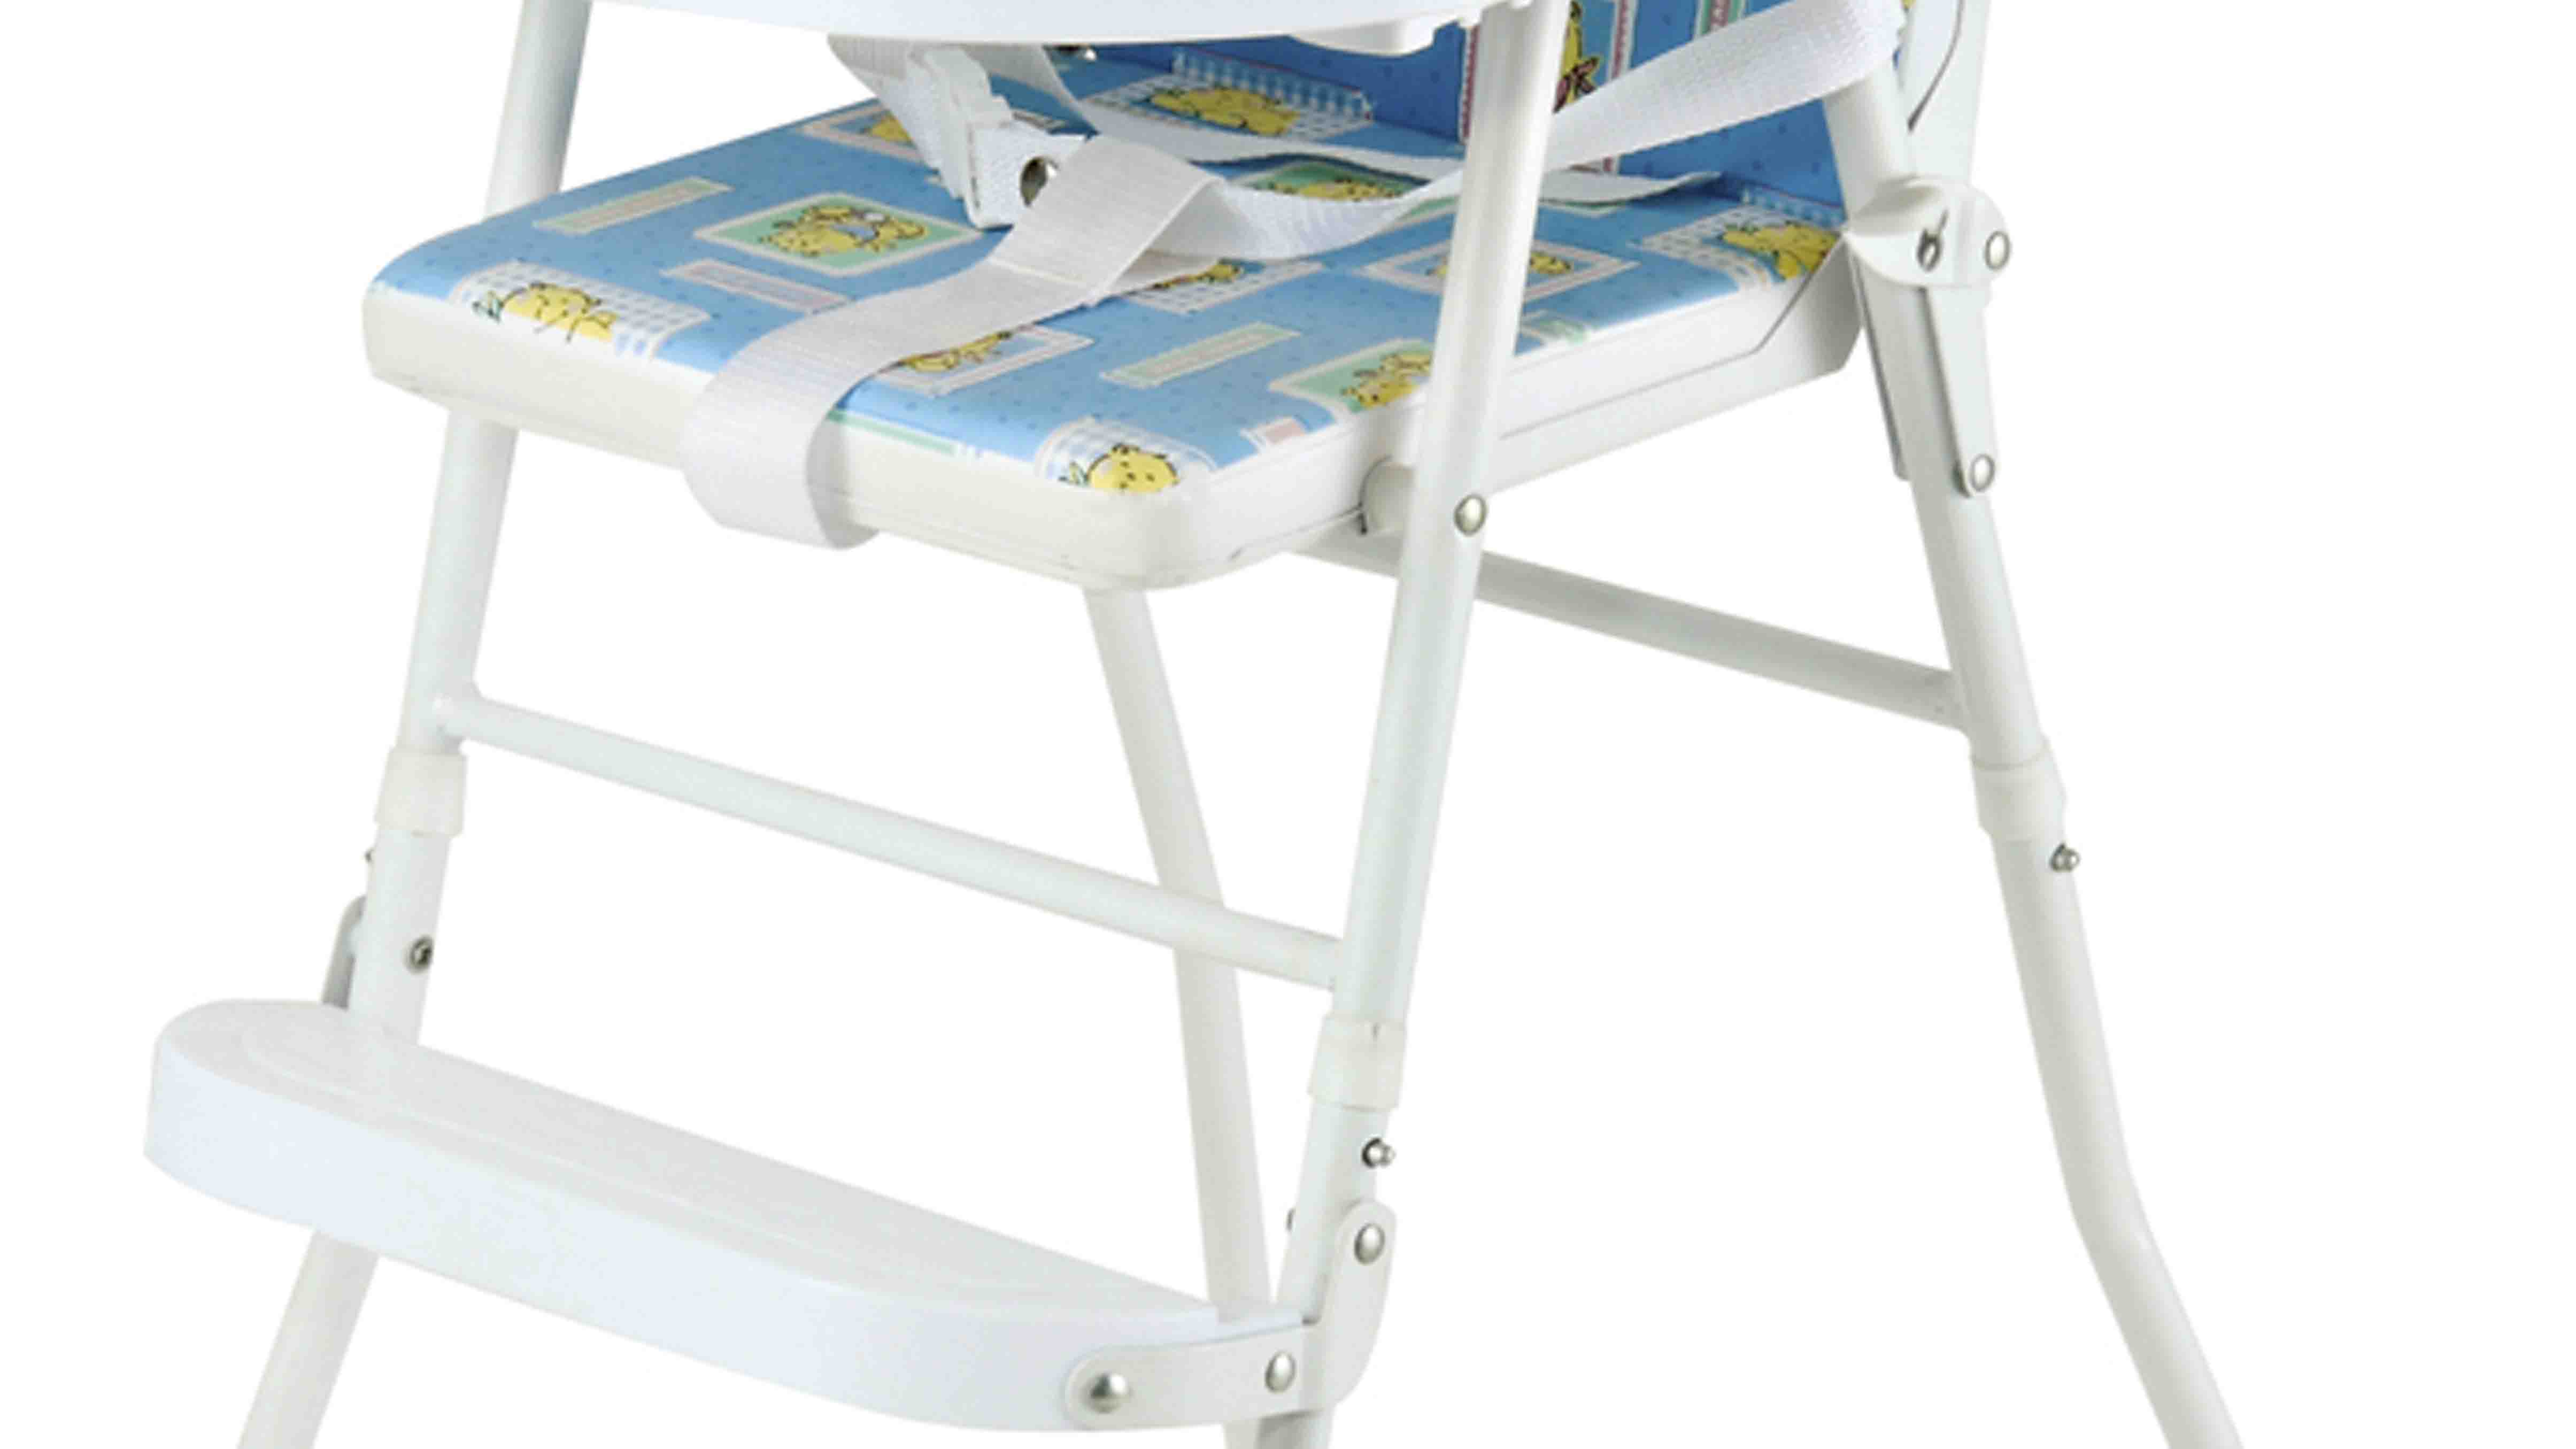 Aoqi folding baby high chair customized for home